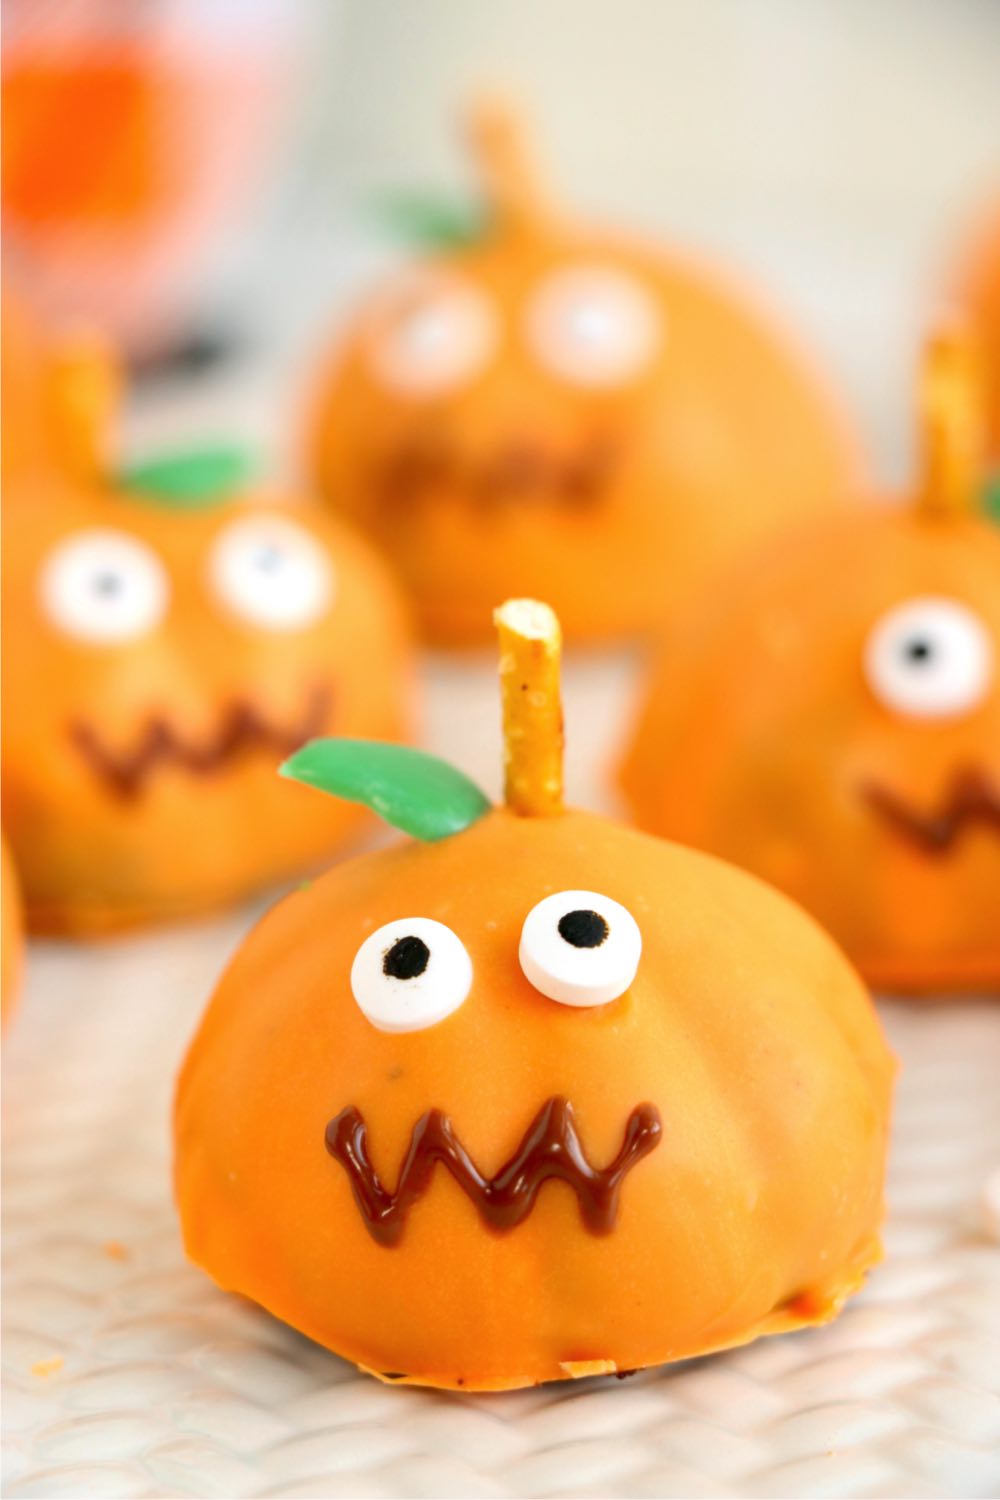 Pumpkin shaped truffle ball with eyes, stem and leaf